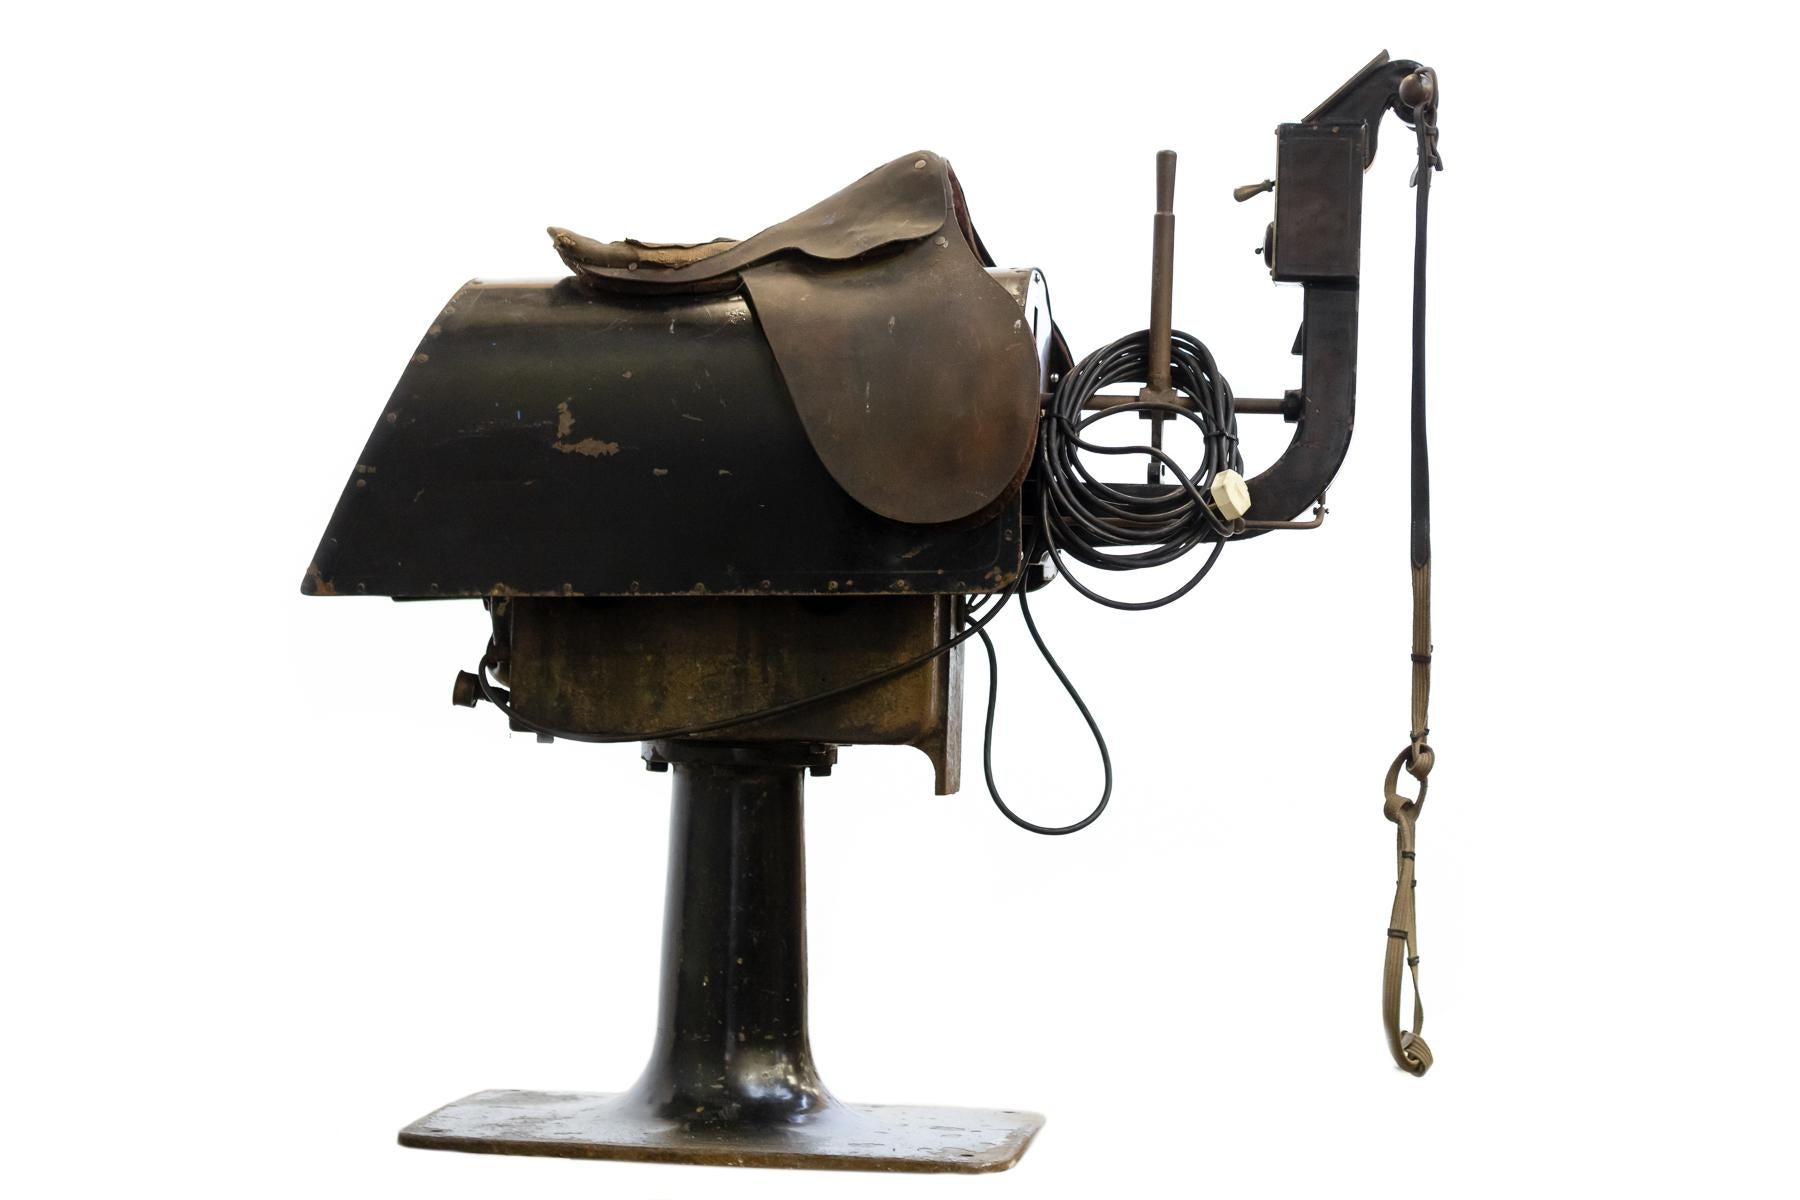 A wonderful, rare and unusual exercise machine in the form of a mechanical horse. The cast iron frame houses a three speed electric motor that moves the 